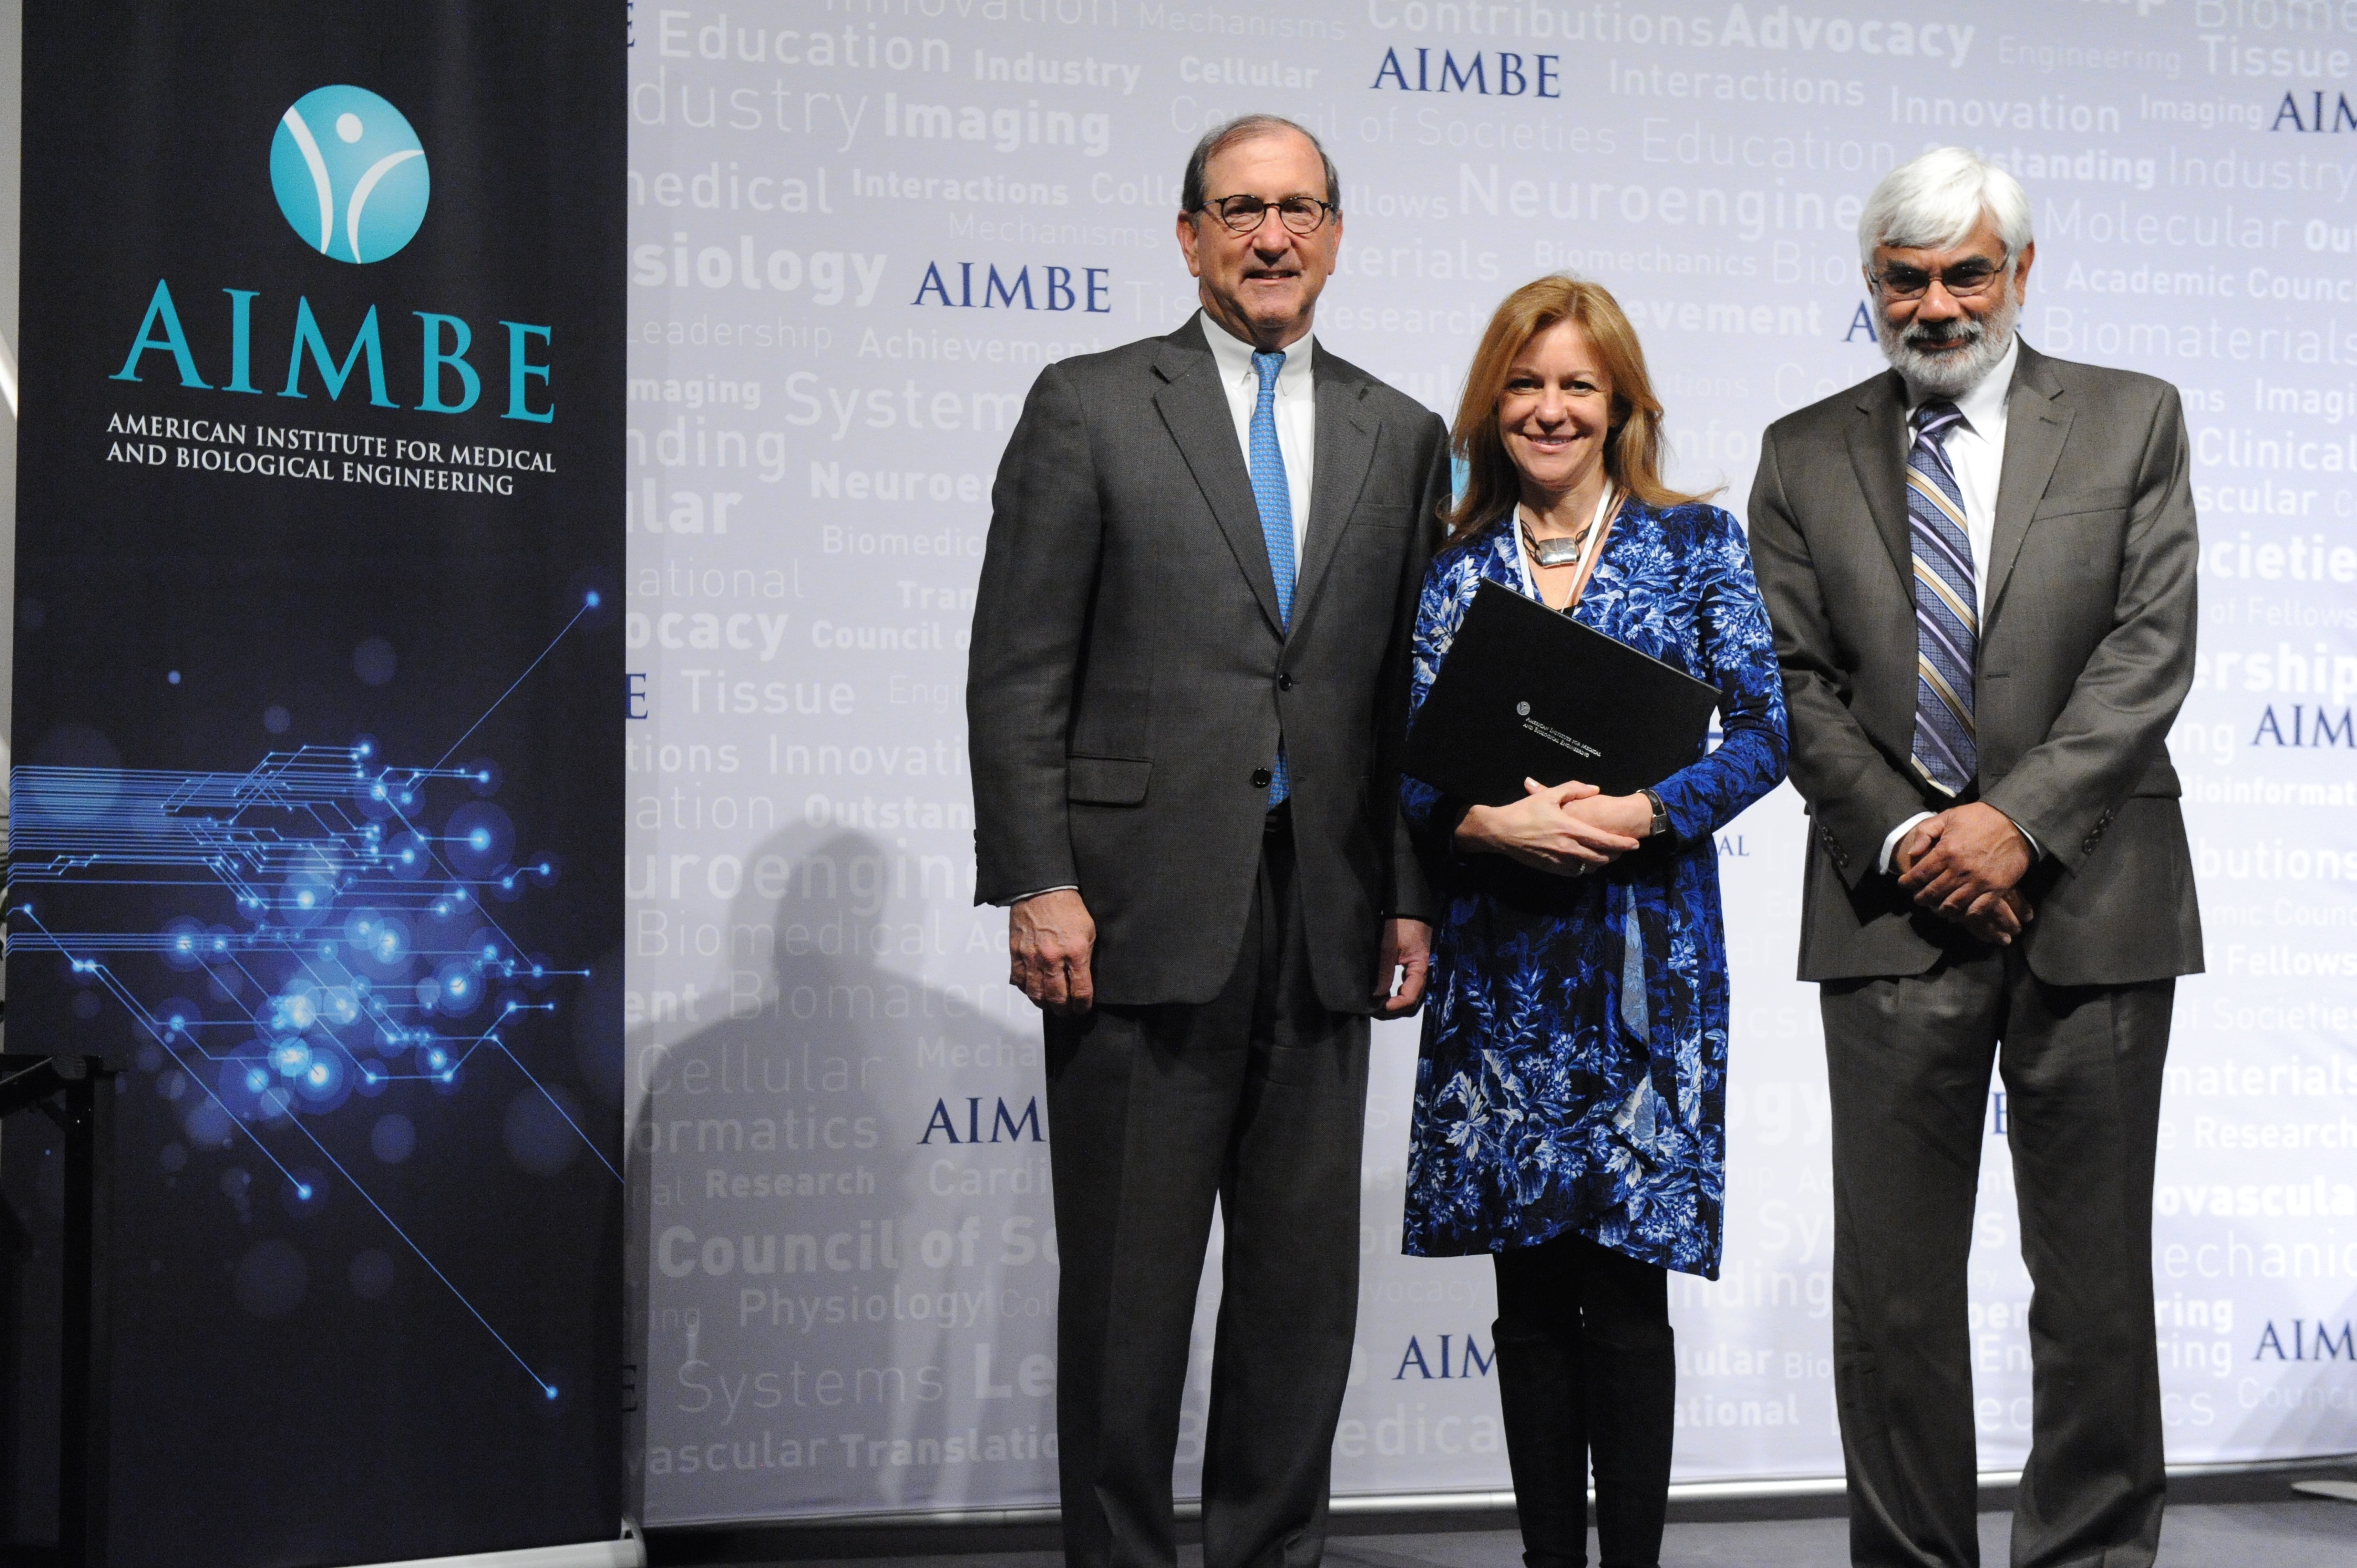 Dr. Marcolongo at the AIMBE induction ceremony